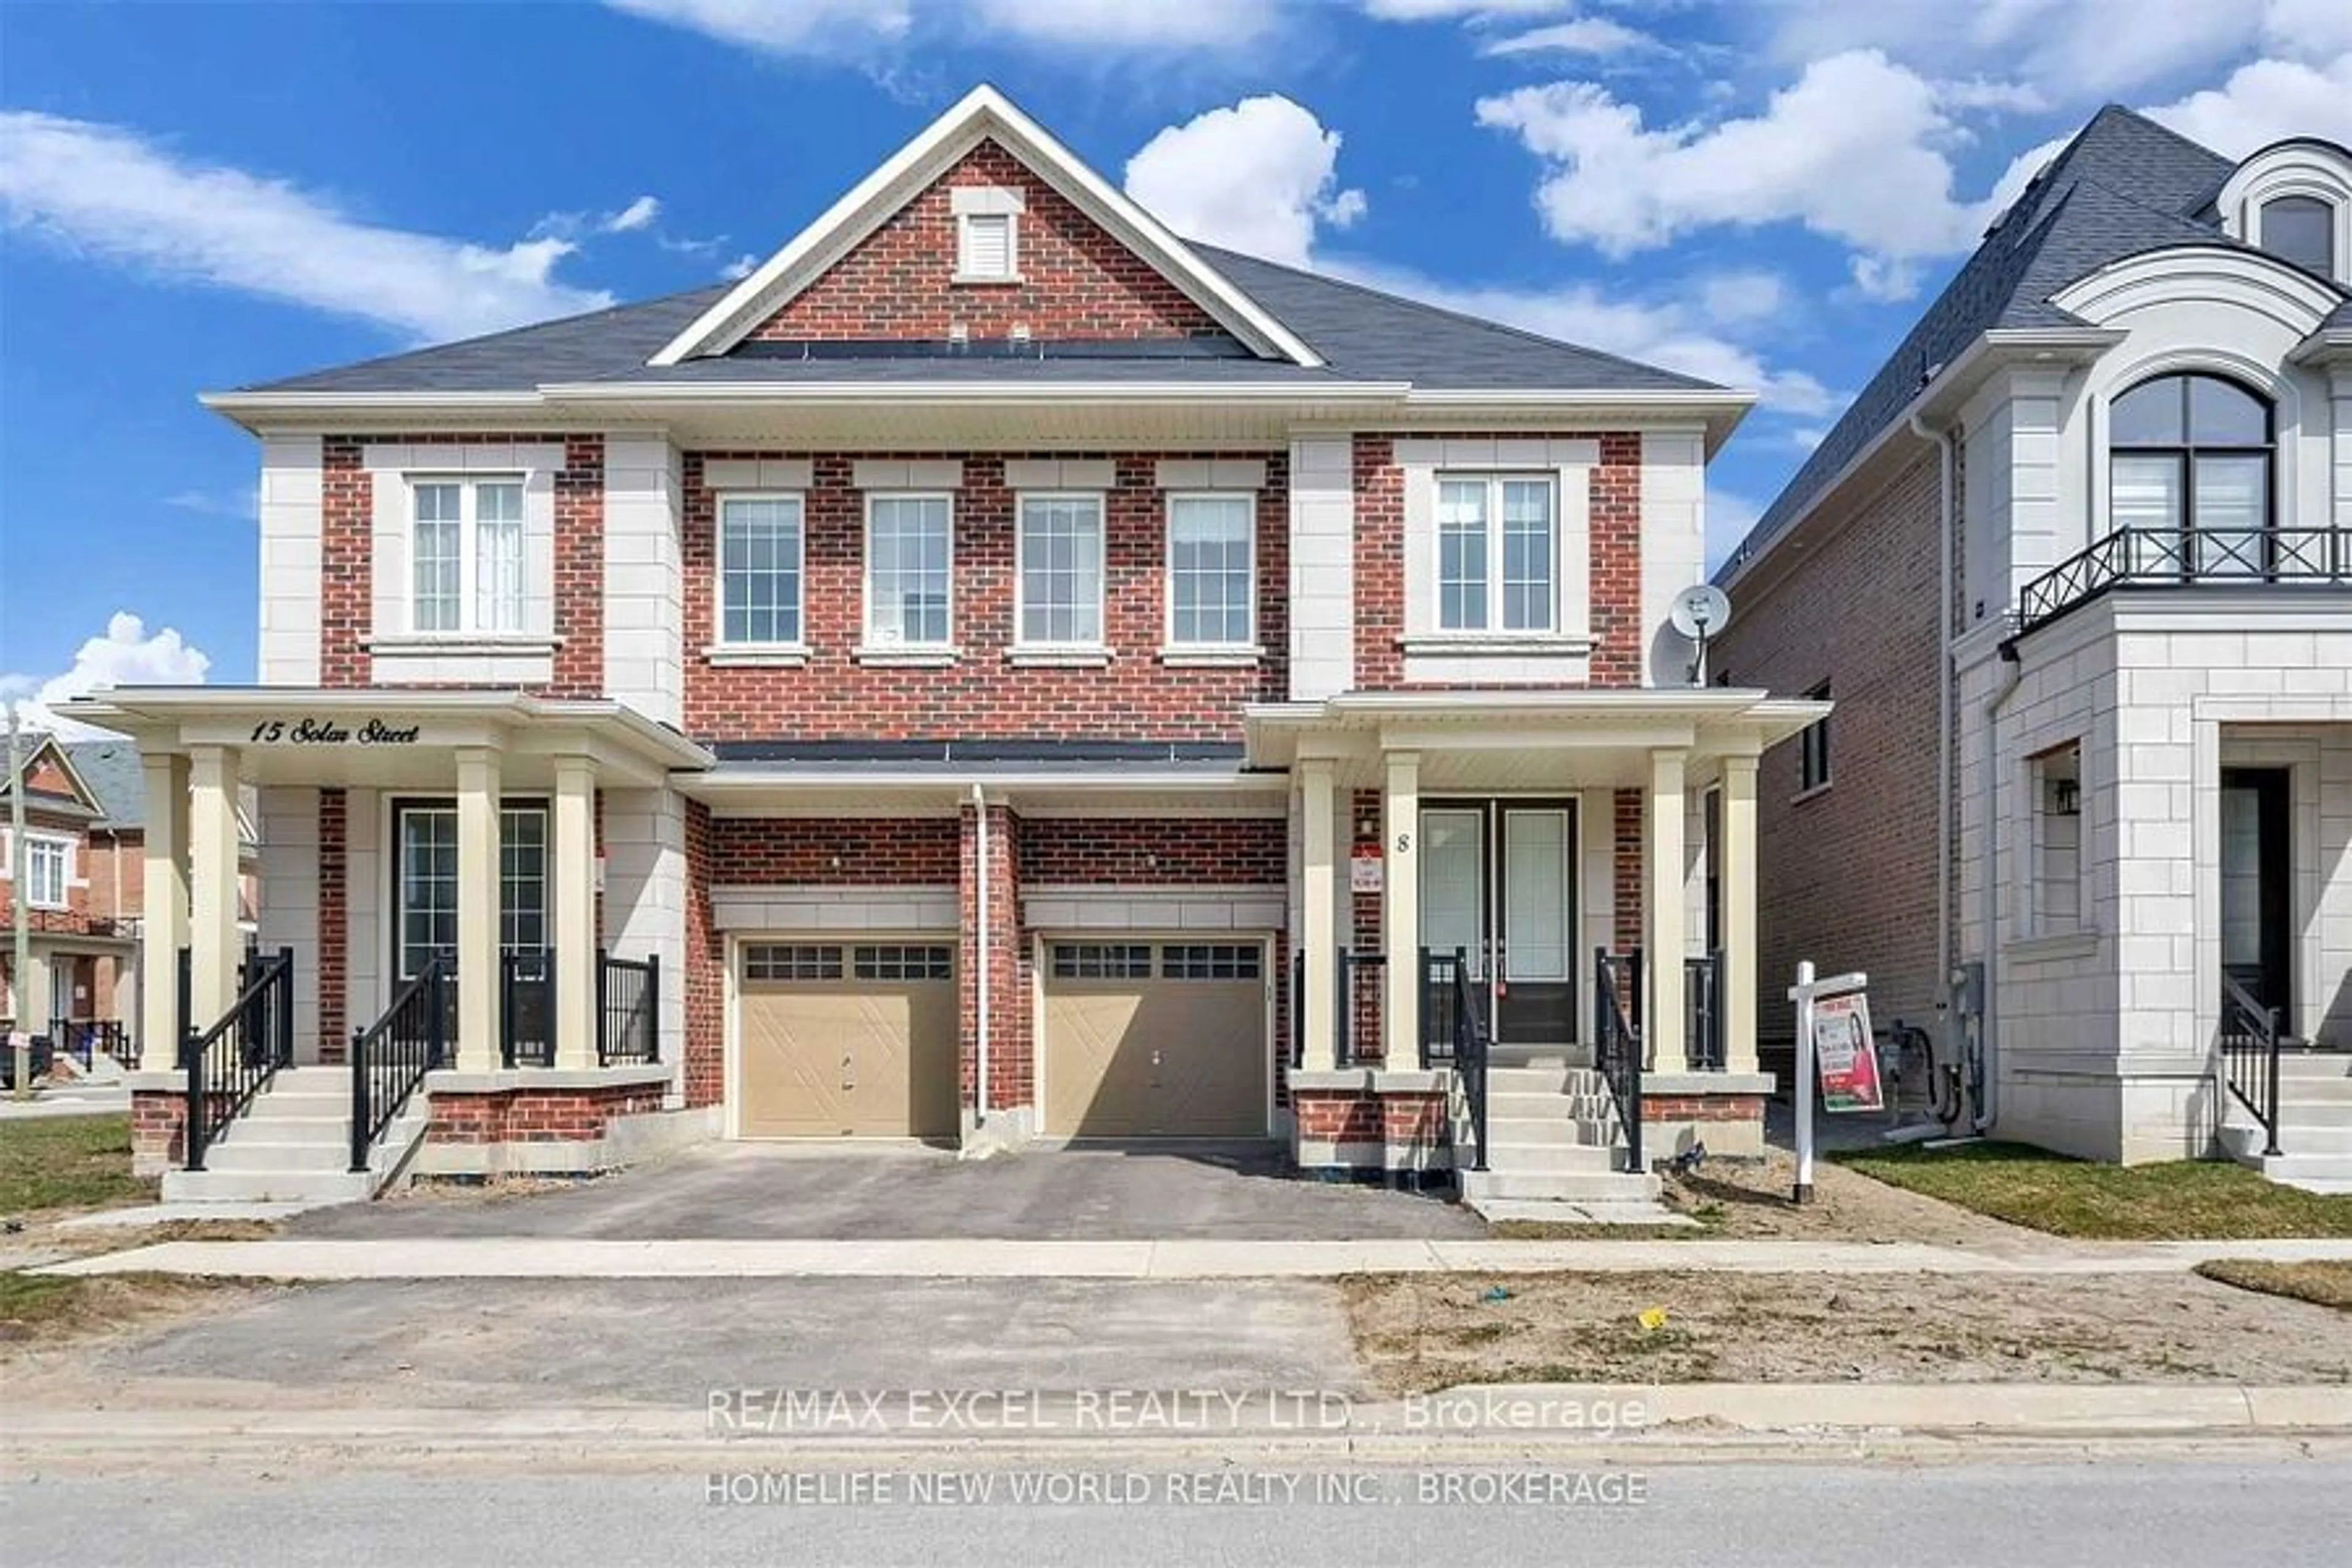 Home with brick exterior material for 8 Orbit Ave, Richmond Hill Ontario L4C 4Z1